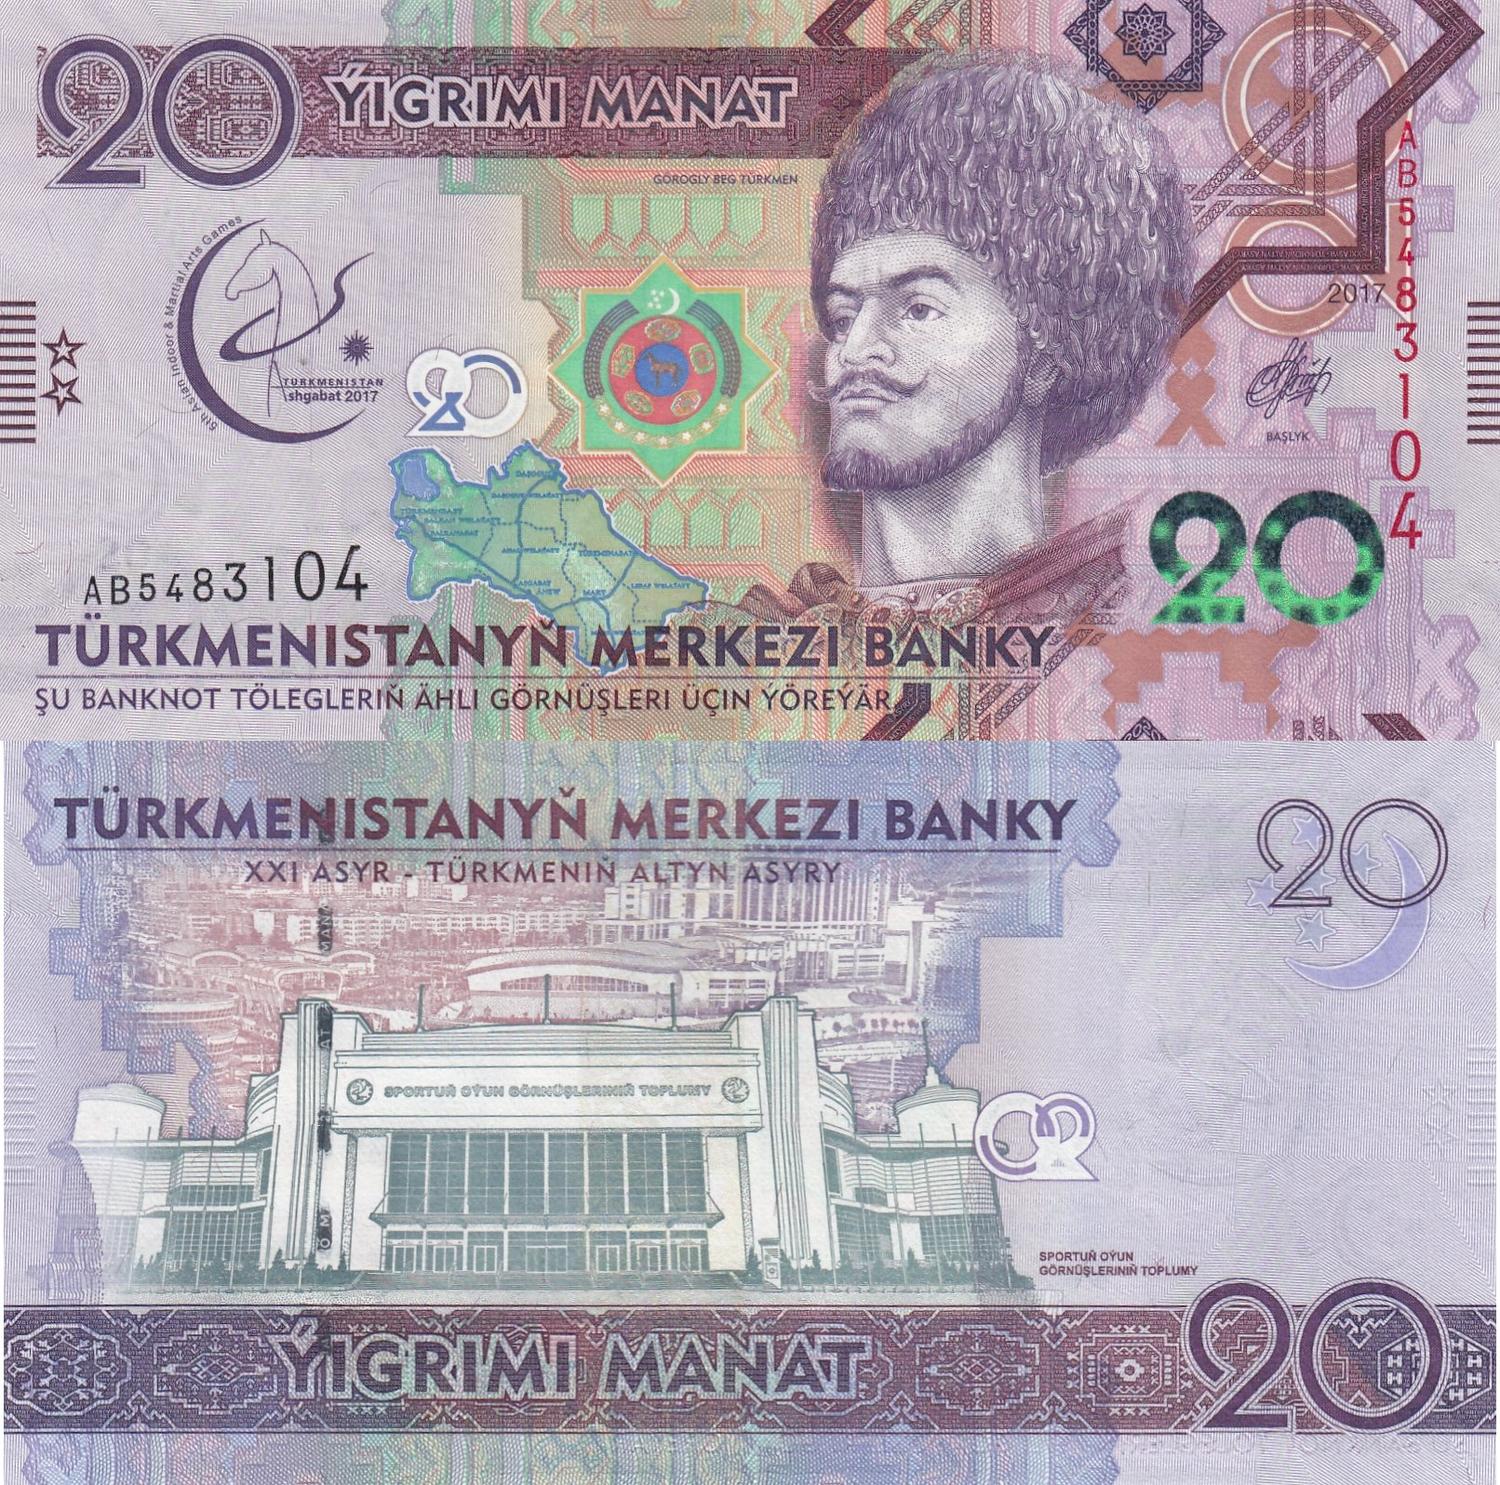 TURKMENISTAN 100 MANAT 2017 P NEW COMM 5th Asian indoor Marial Game UNC